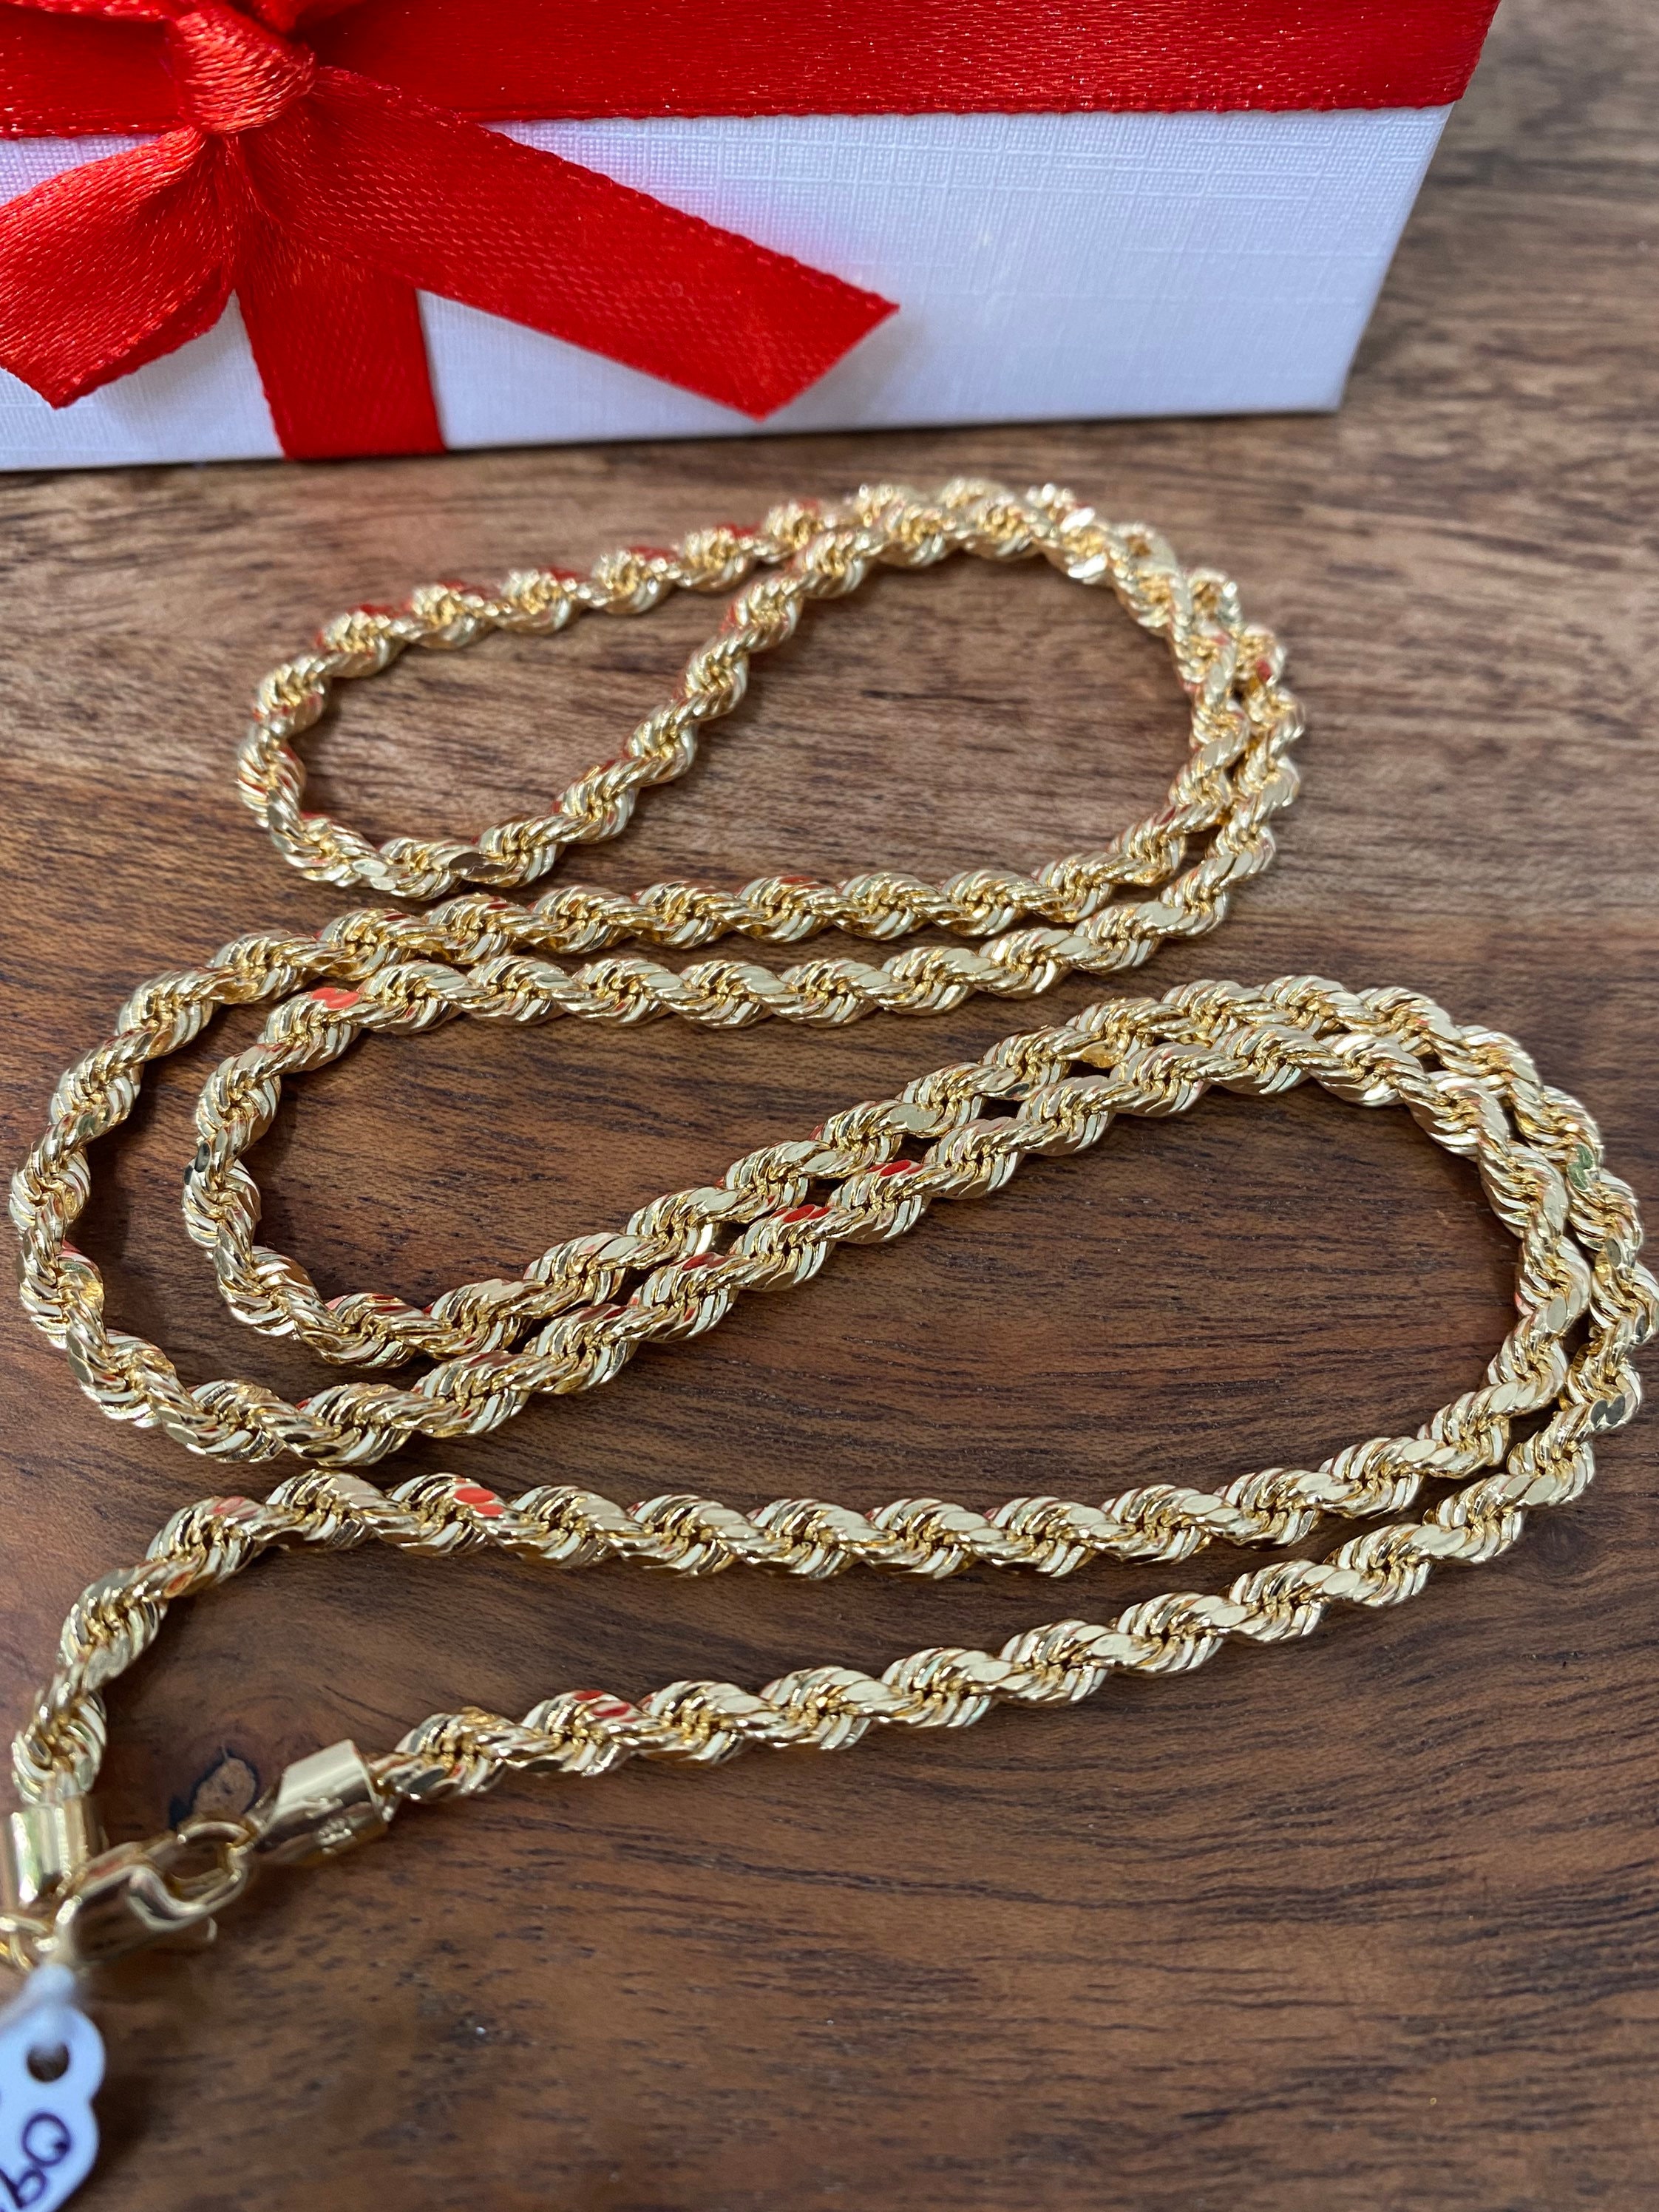 Solid 18K Yellow Gold 33 Gram Twisted Rope Chain 3.2mm 30in Mens Ladies Necklace